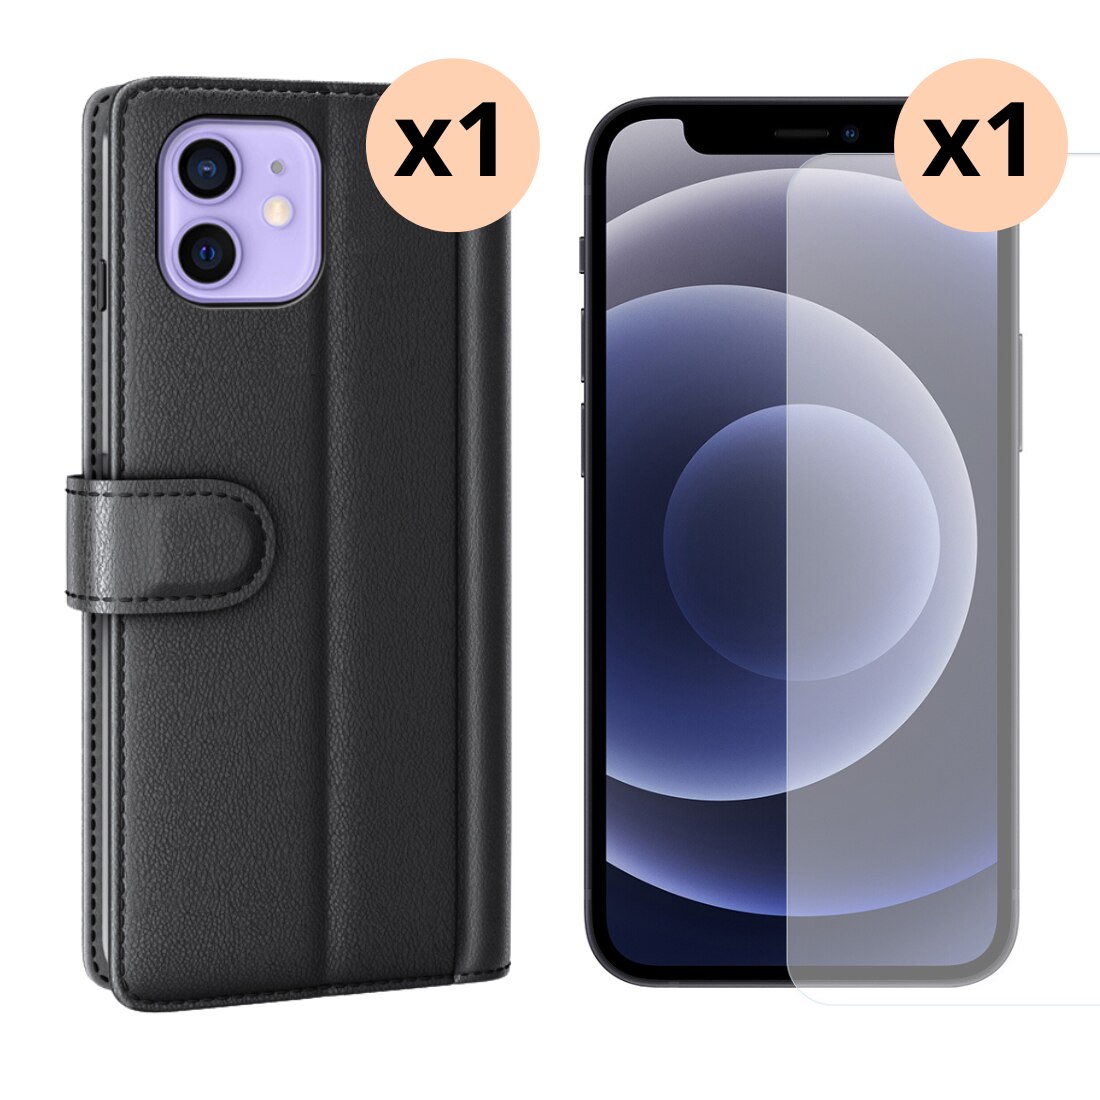 iPhone 11 Kit w. Wallet Case and Screen Protector